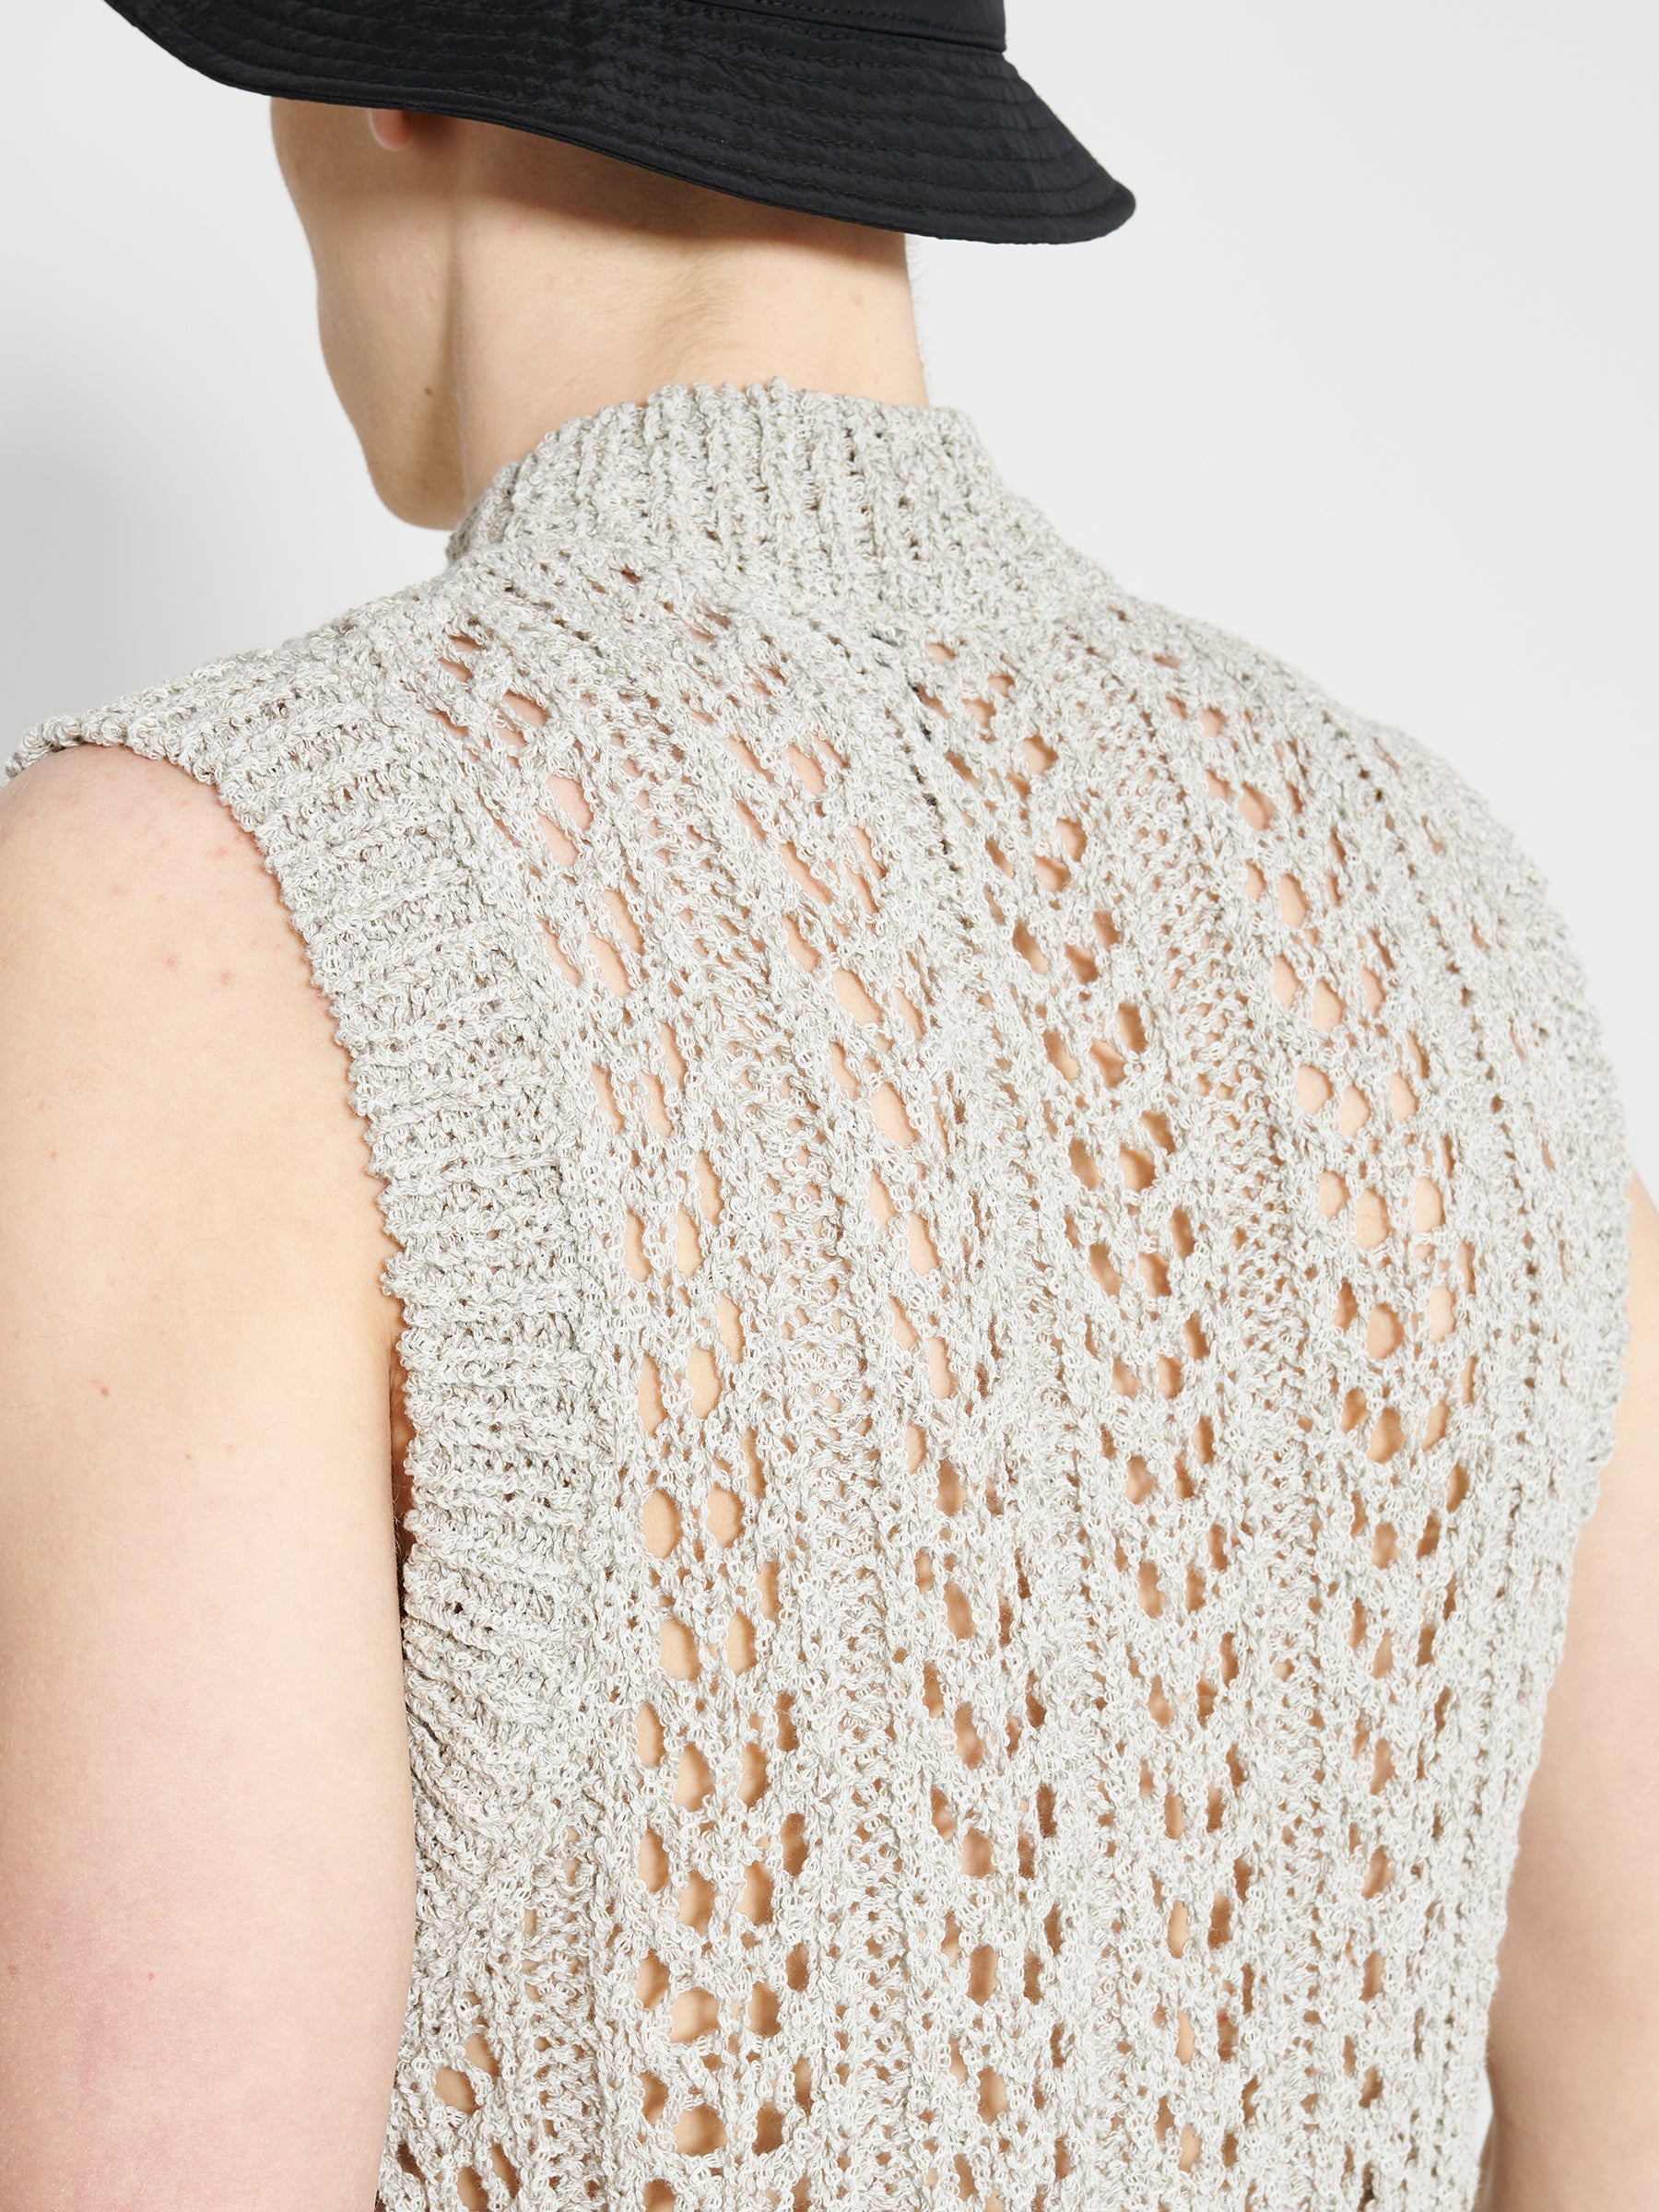 _J.L-A.L_ Redos Knitted Vest Silver Grey